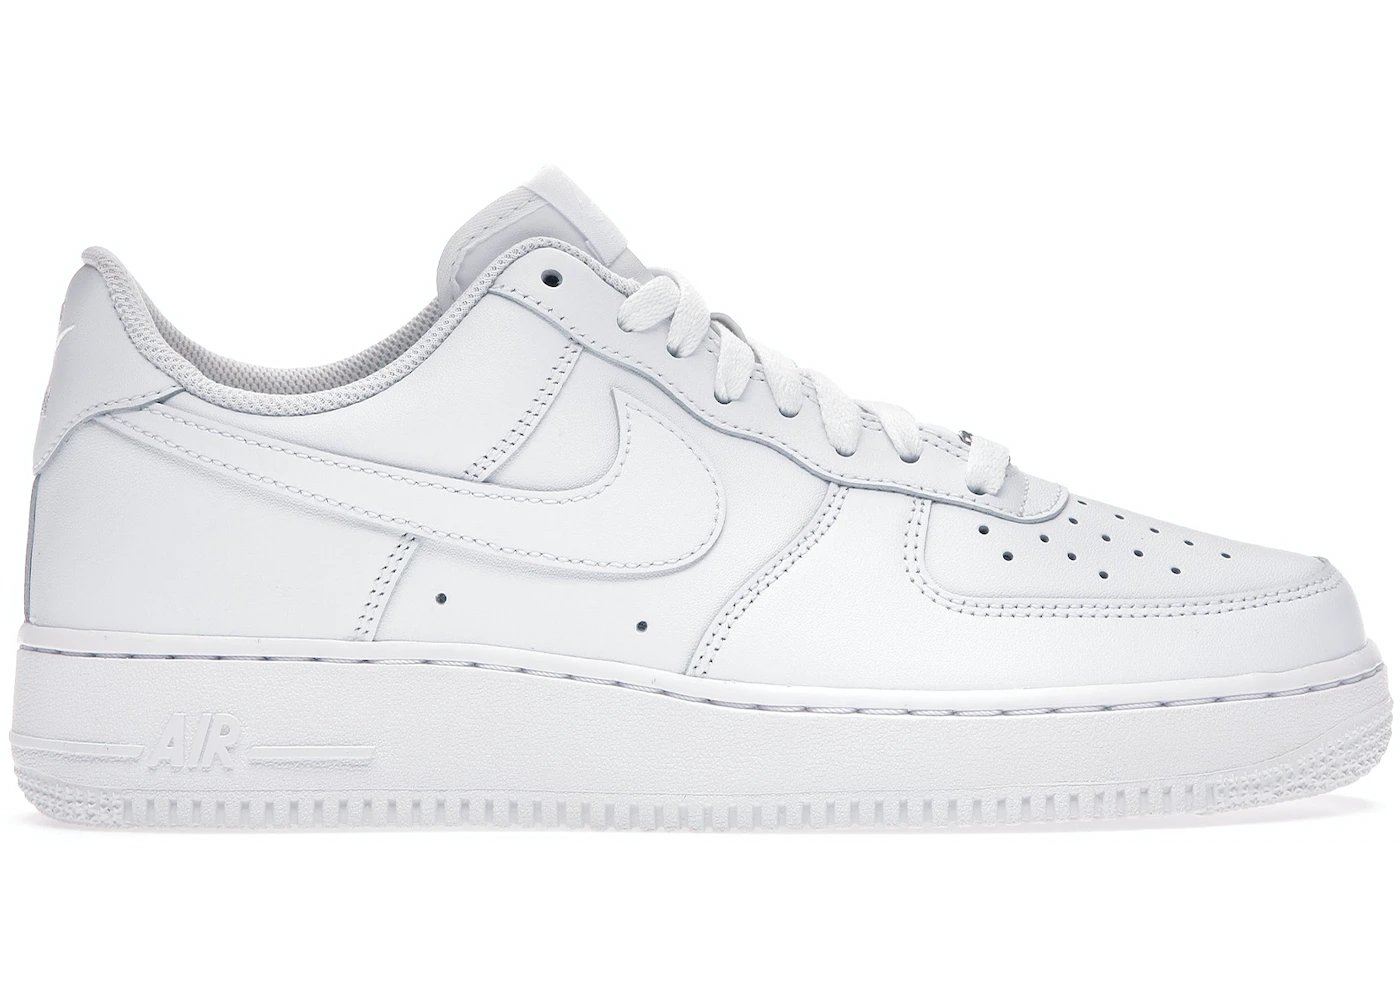 Appraisal tanker Foresee Buy Nike Air Force 1 - Low White